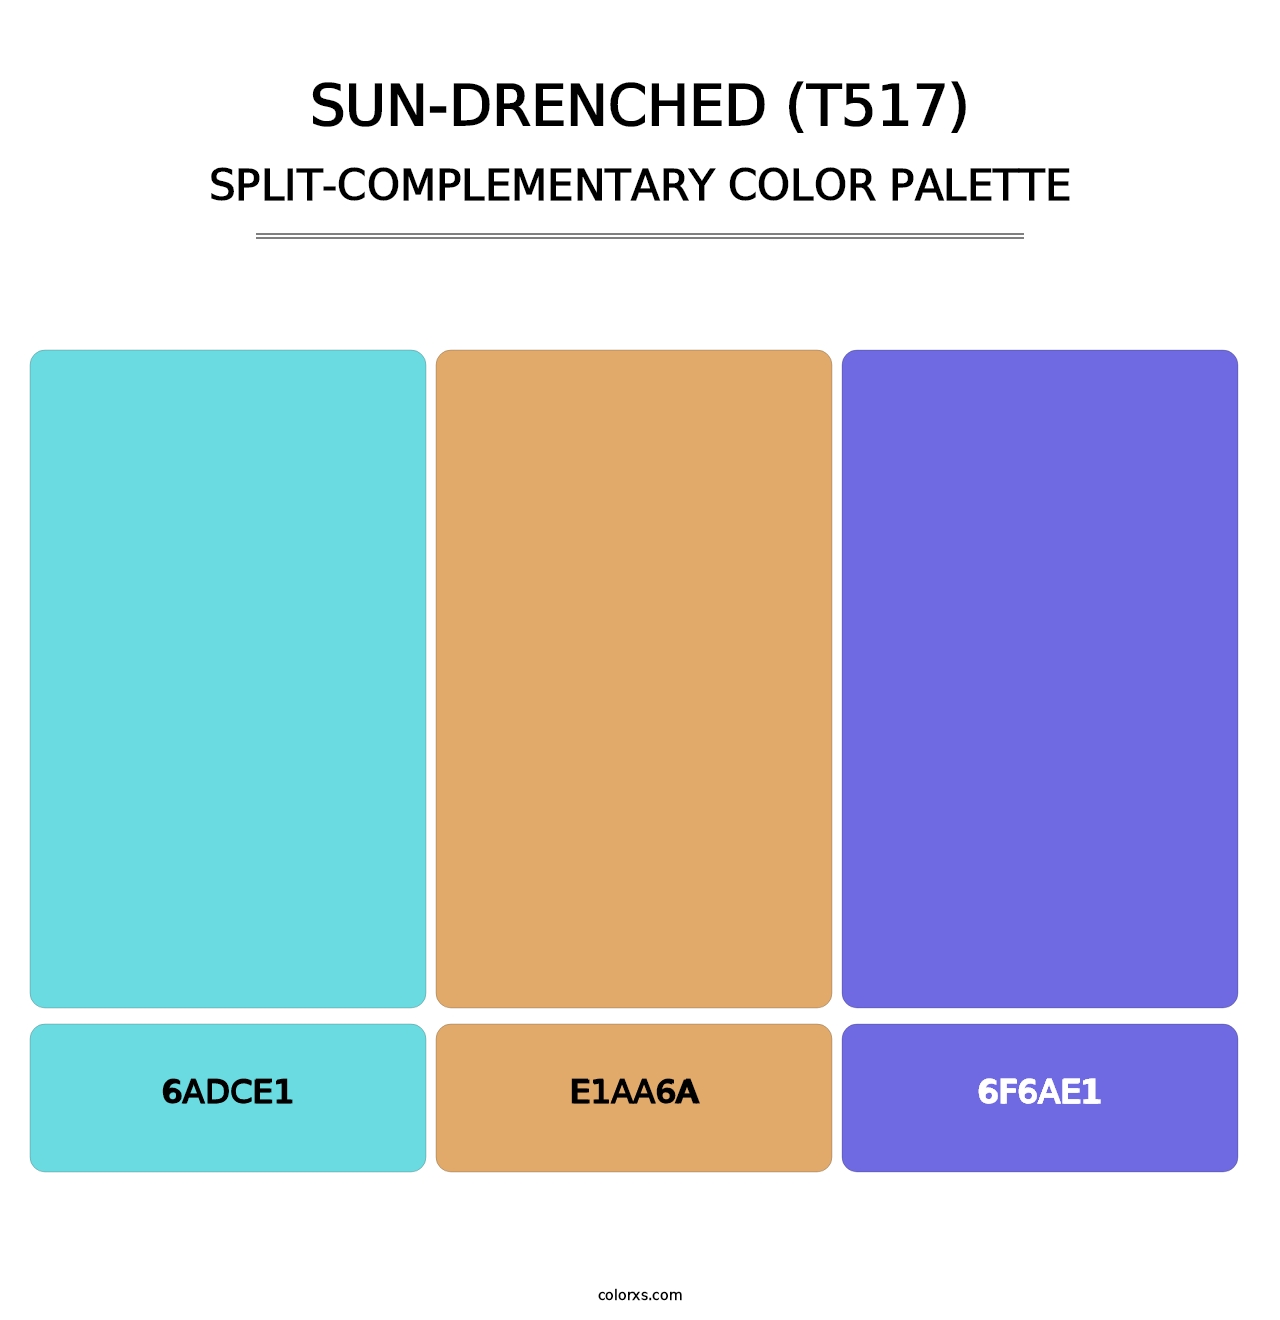 Sun-Drenched (T517) - Split-Complementary Color Palette